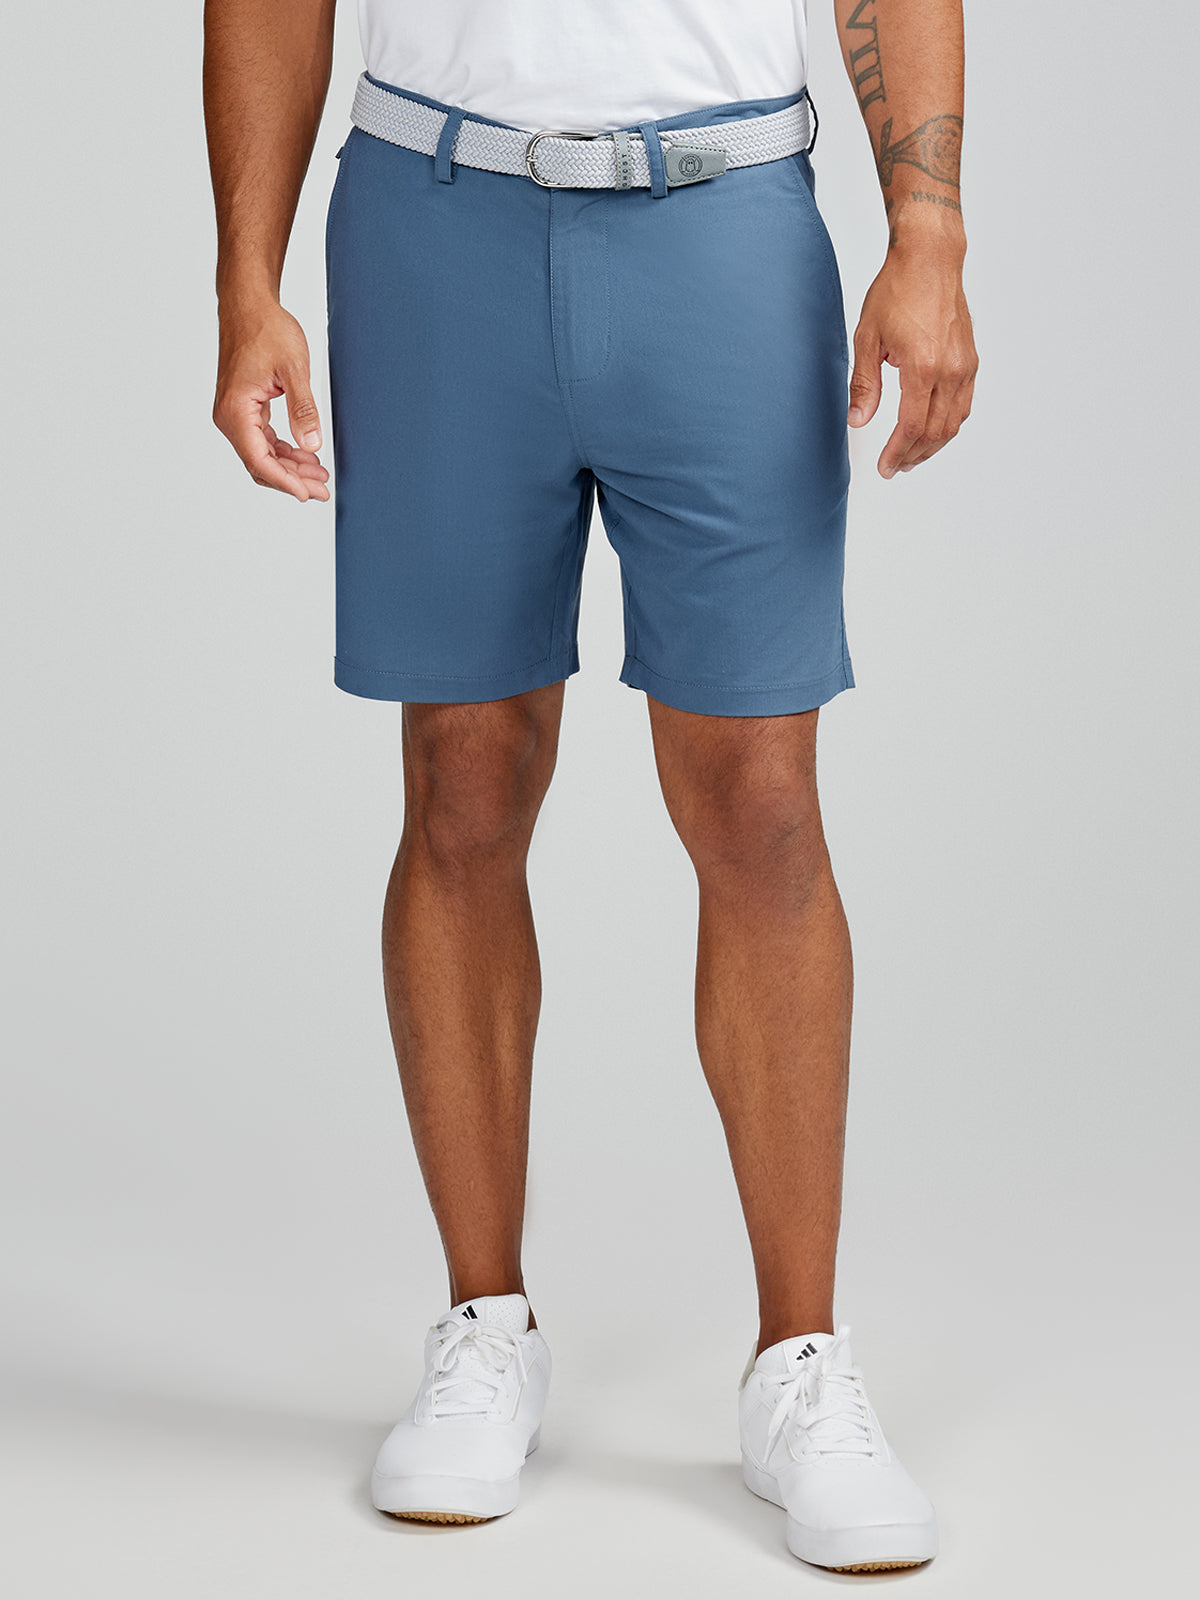 Shop our Men's Performance Golf Shorts with 7-Inch Inseam: Black